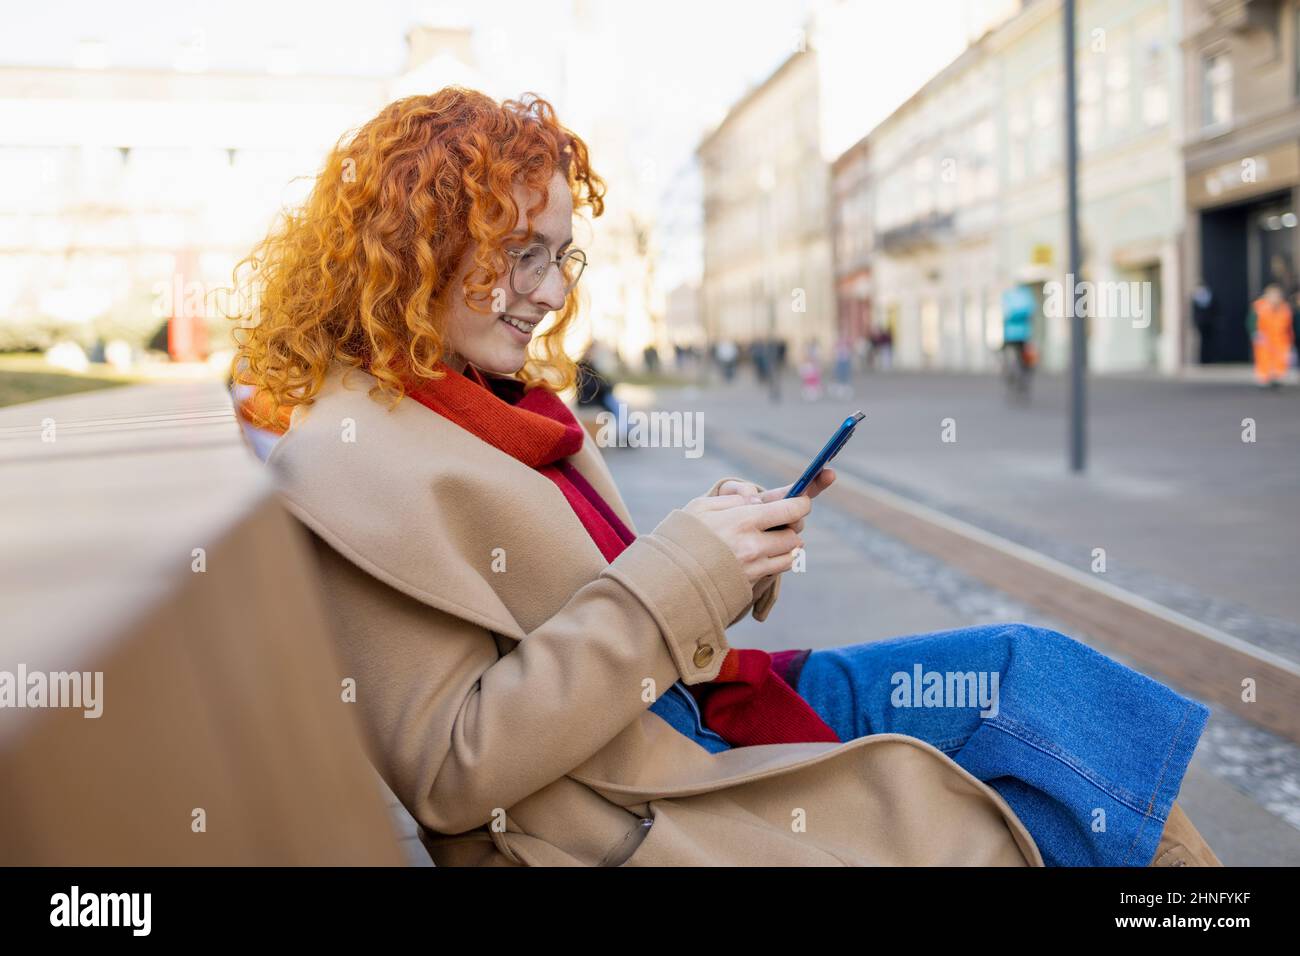 Curly woman using her phone in city center Stock Photo